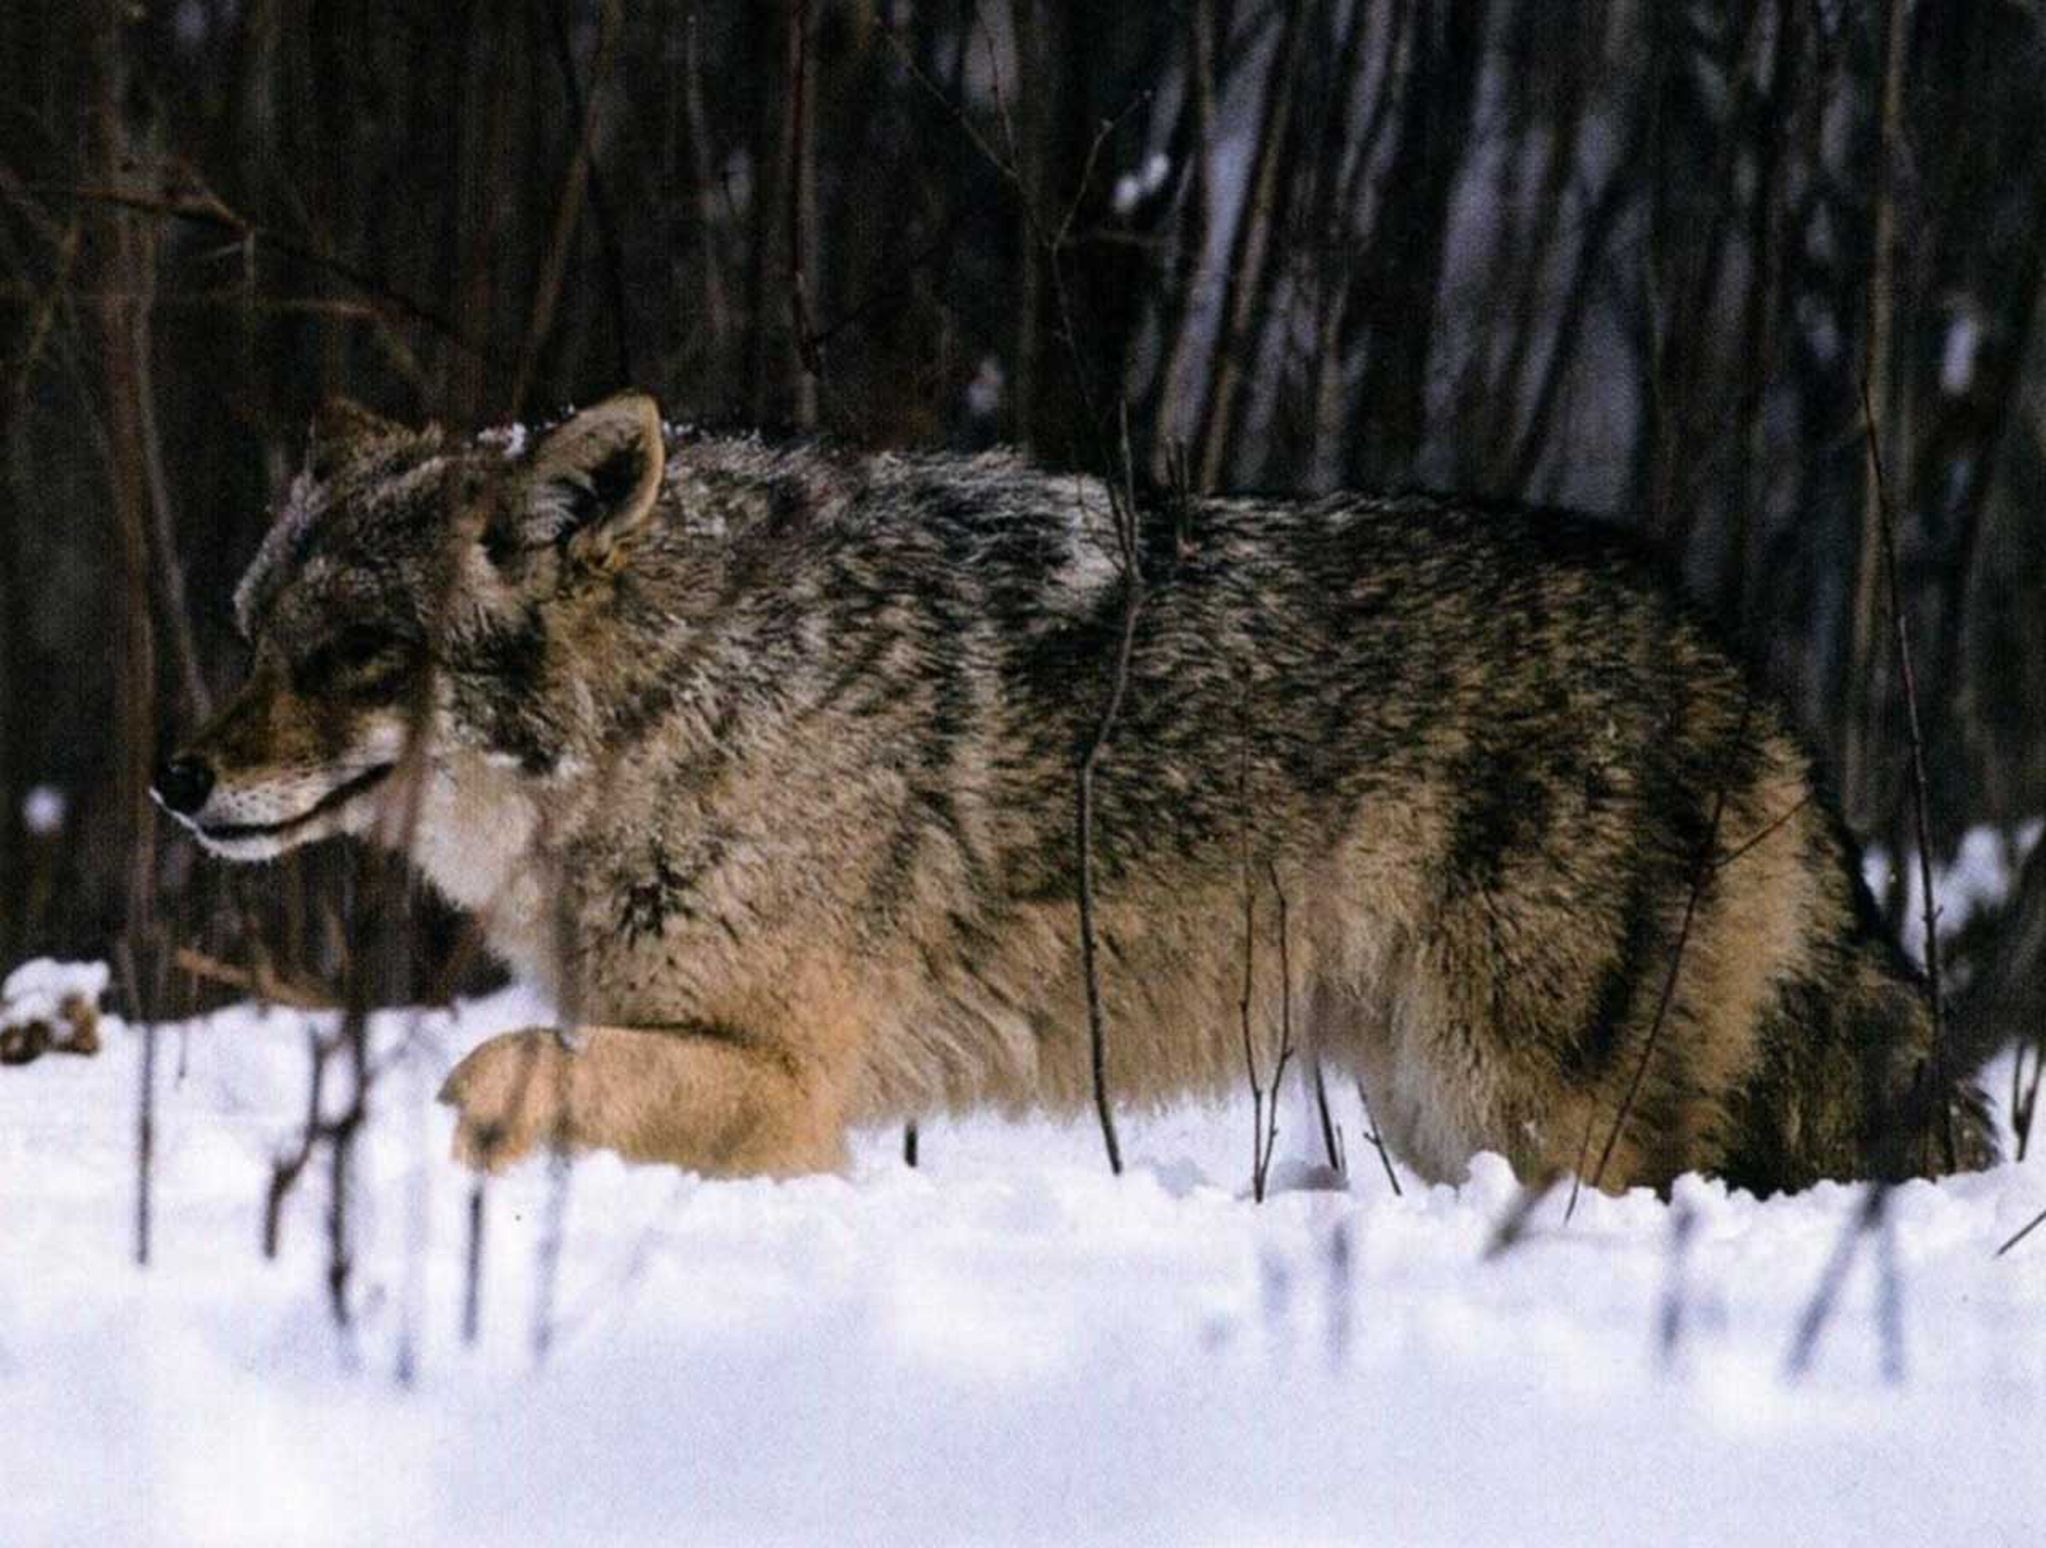 In late winter you can excite a male coyote by "talking dirty."